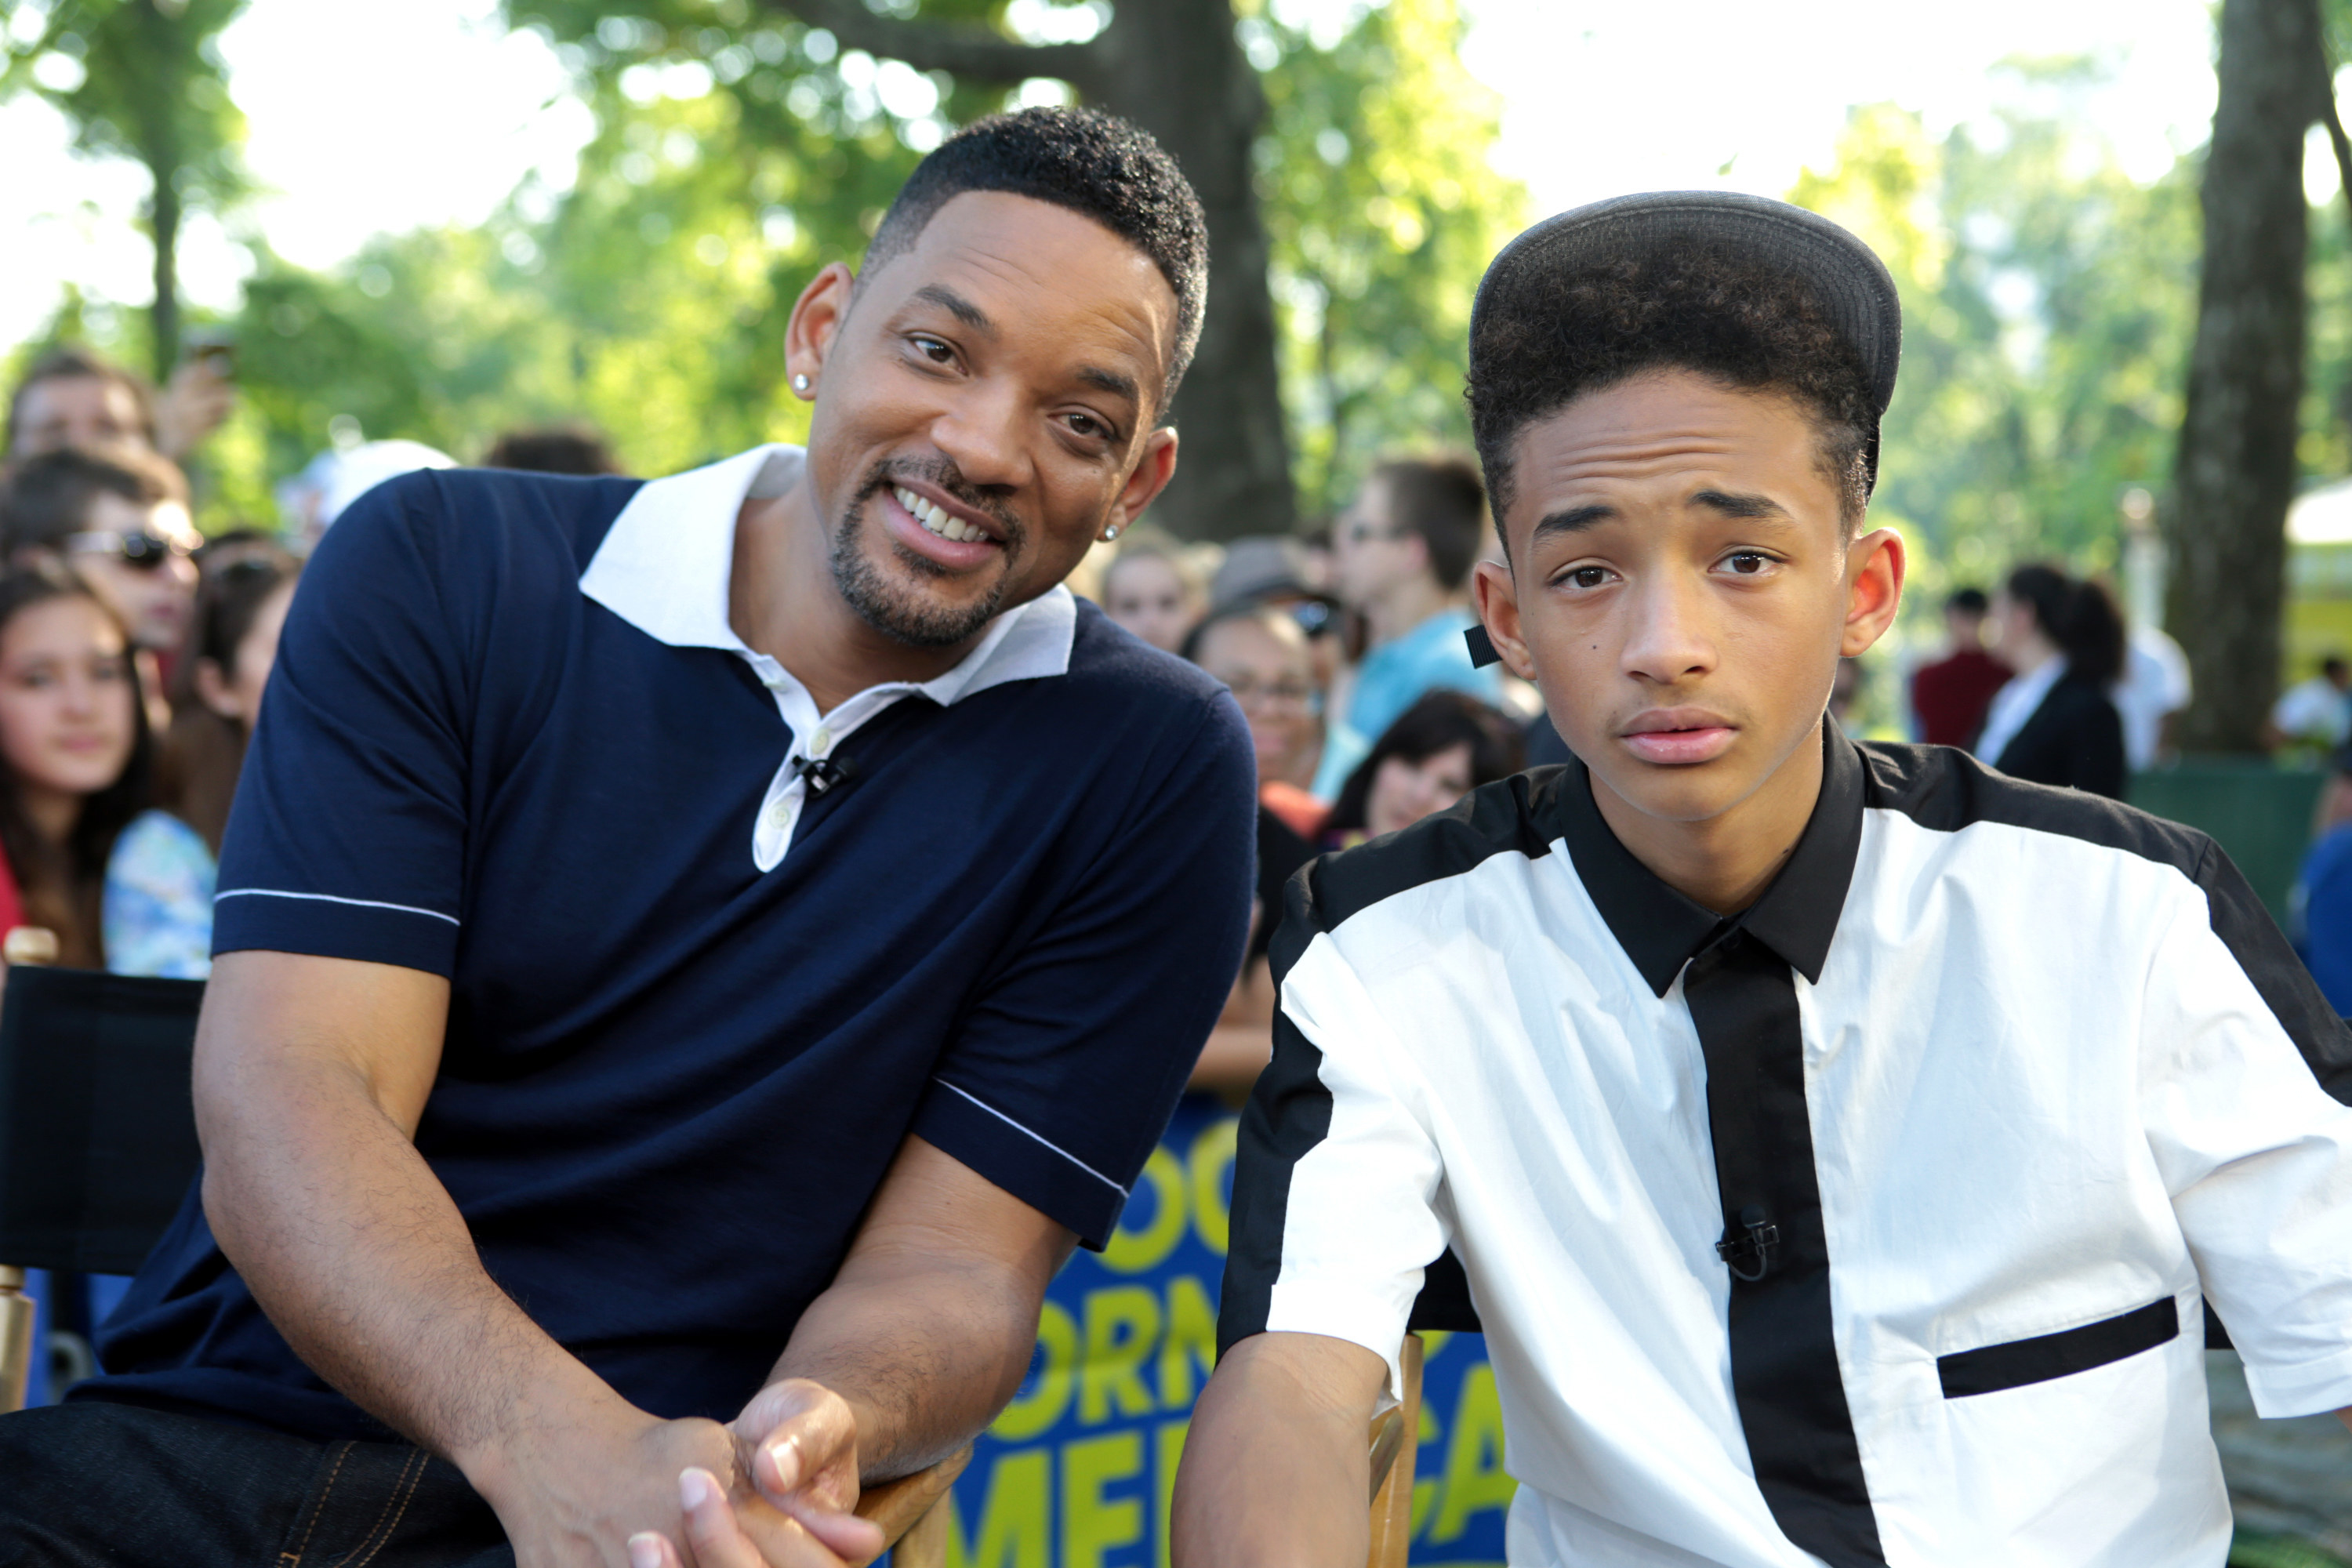 Jaden Smith, the son of Will Smith looking like a 60 year old crack addict  : r/Justfuckmyshitup